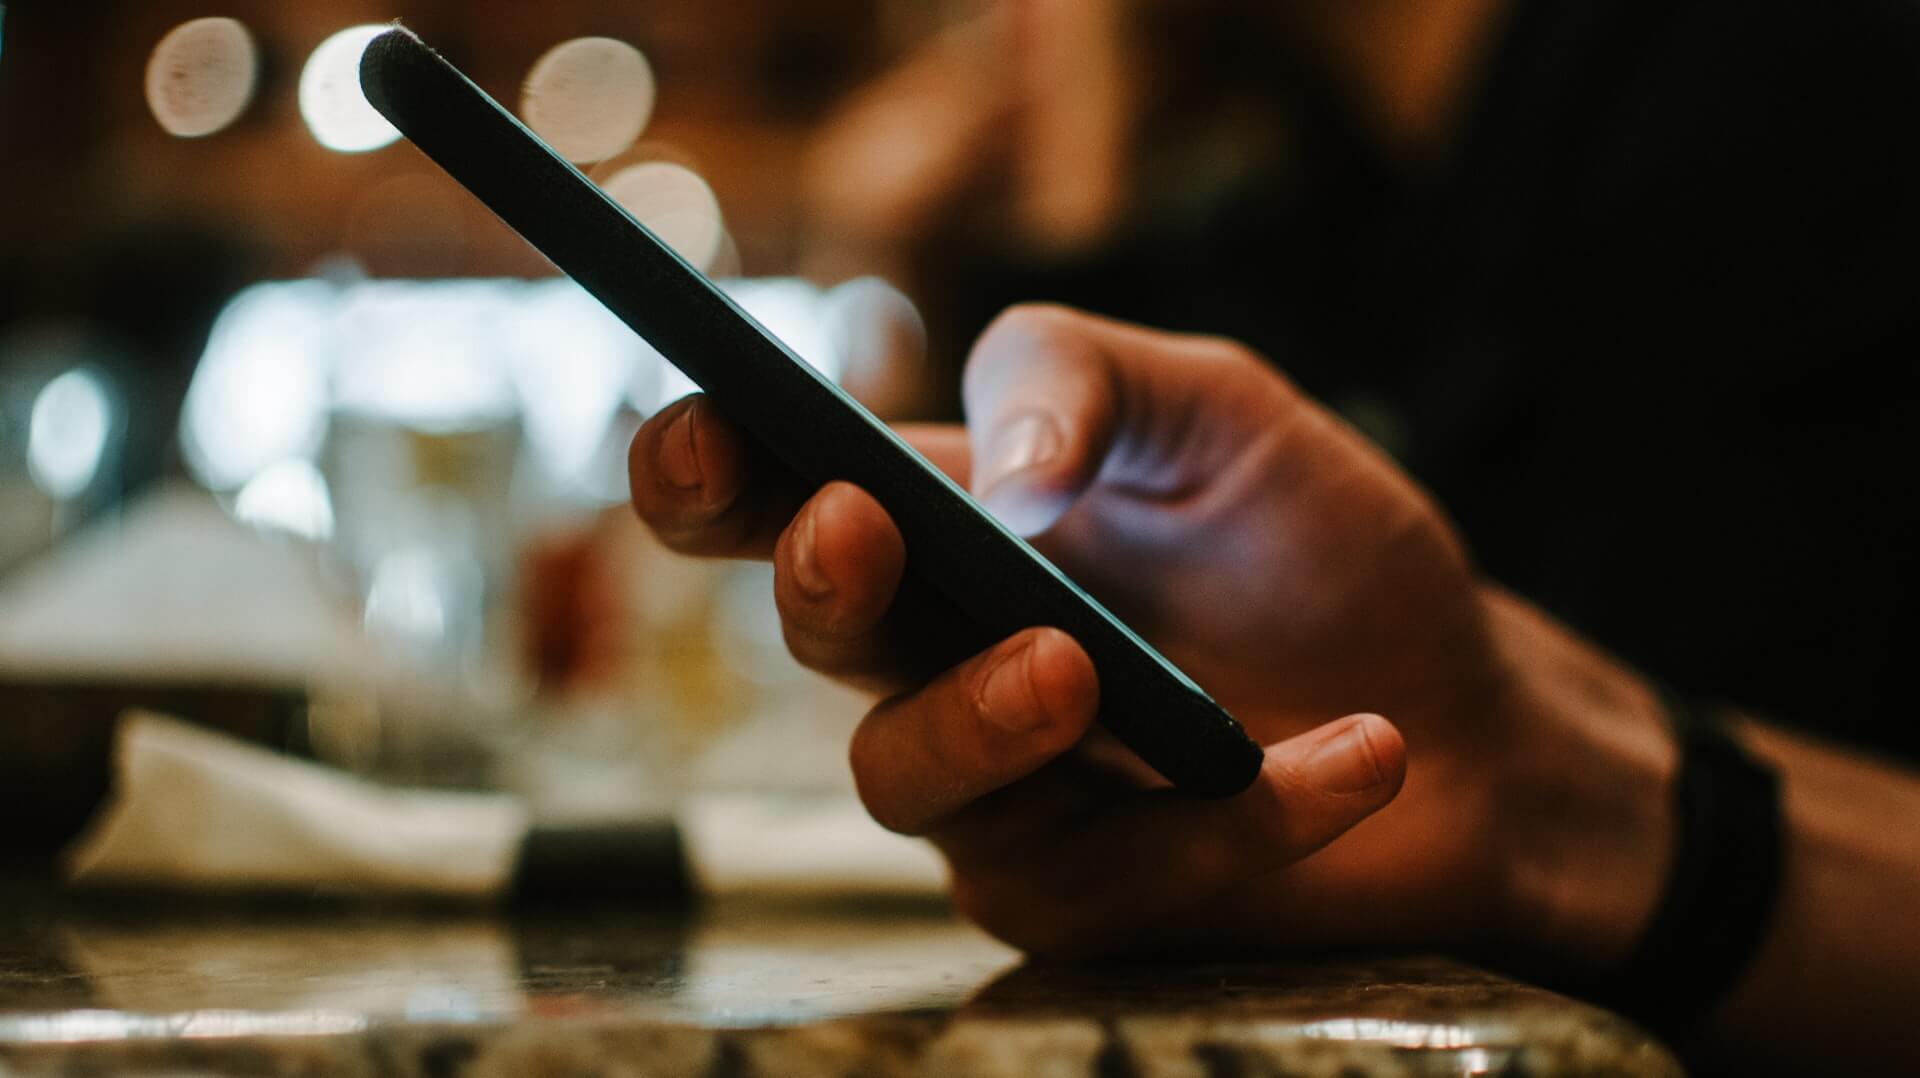 Close-up shot of person texting on phone in a restaurant